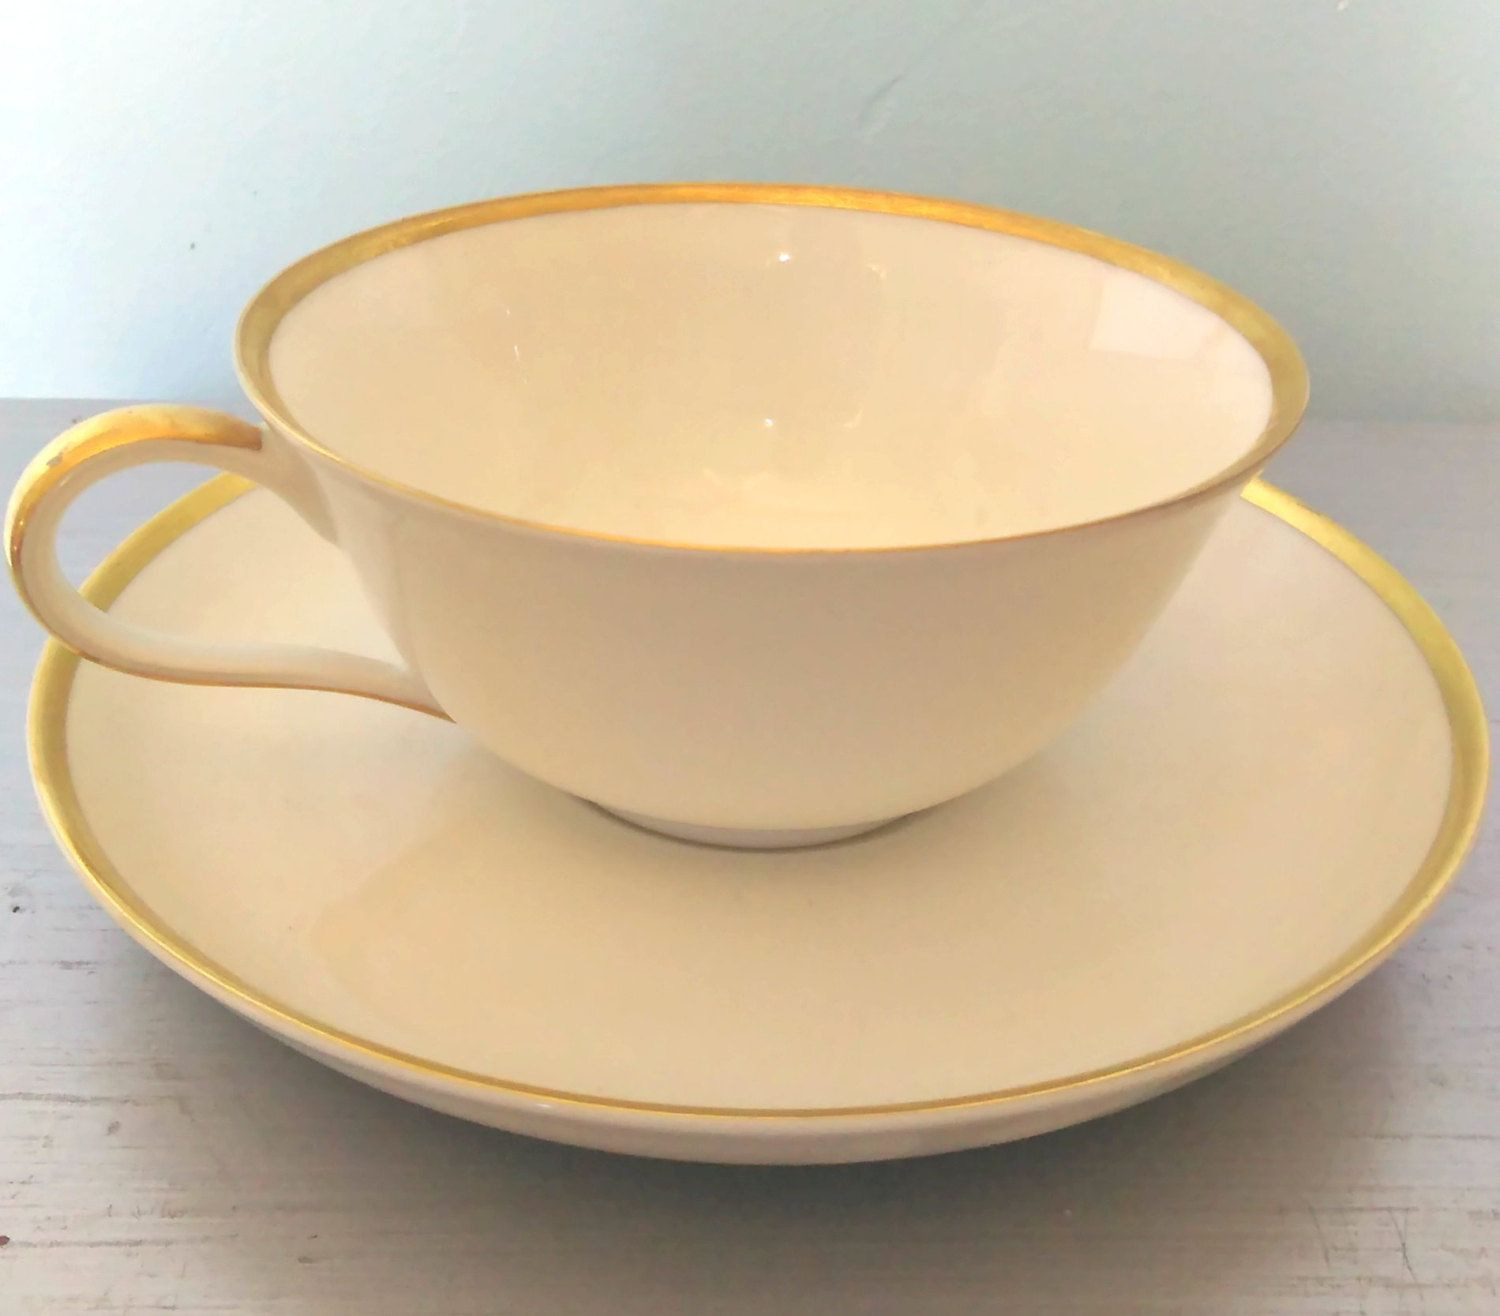 15 attractive Rosenthal Crystal Vase Germany 2024 free download rosenthal crystal vase germany of vintage teacup and saucer white and gold trim rosenthal selb germany inside vintage rosenthal selb germany white with gold trim teacup and saucer helena pat